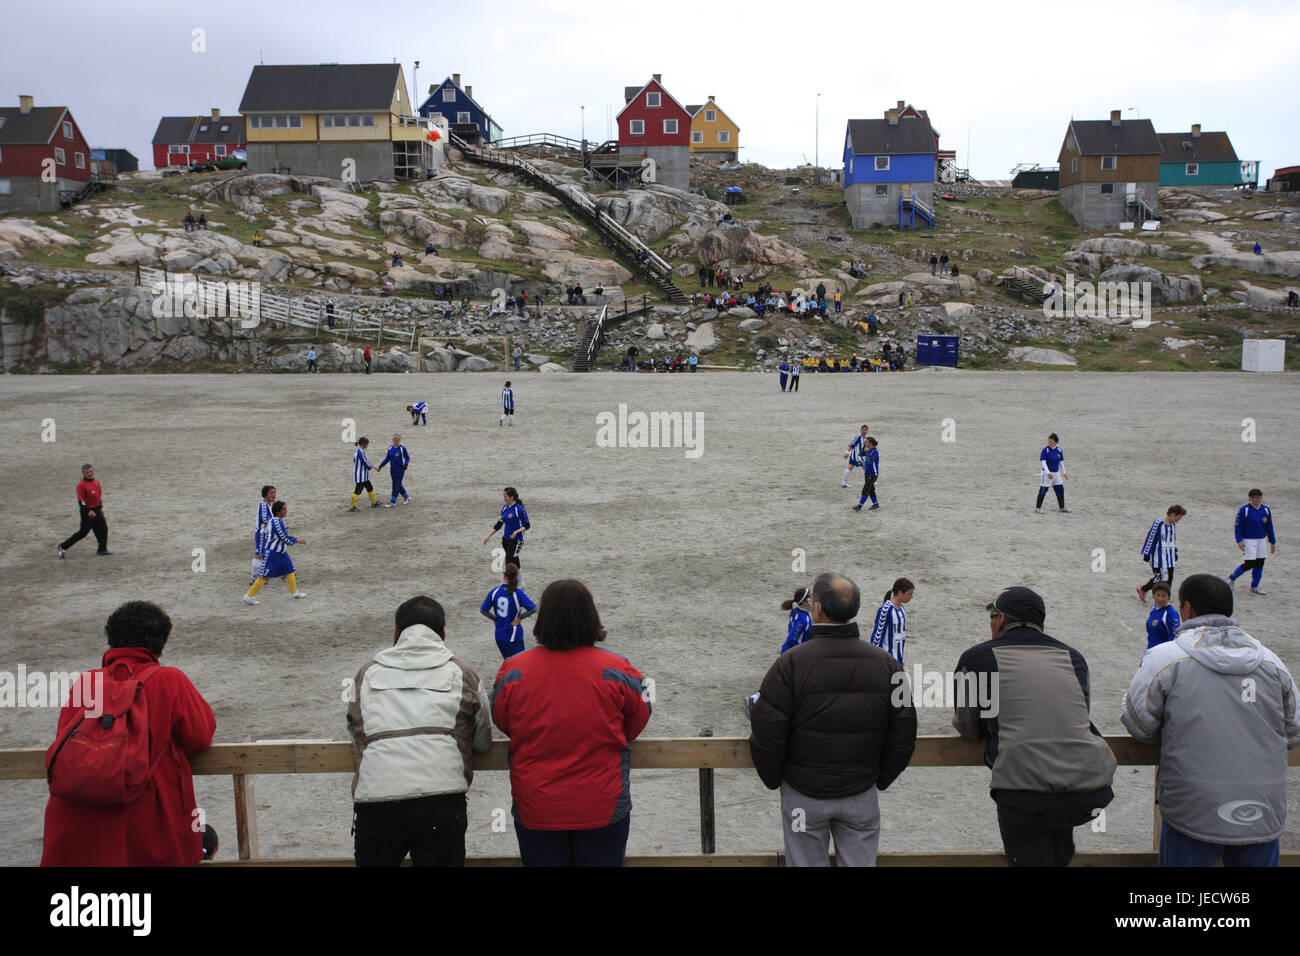 Greenland, Disco Bay, Ilulissat, town view, timber houses, football field, player, spectator, no model release, Western Greenland, outside, the Arctic, coast, town, residential houses, architecture, timber houses, brightly, field, sports field, sport, sport, person, football player, football match, football, Stock Photo